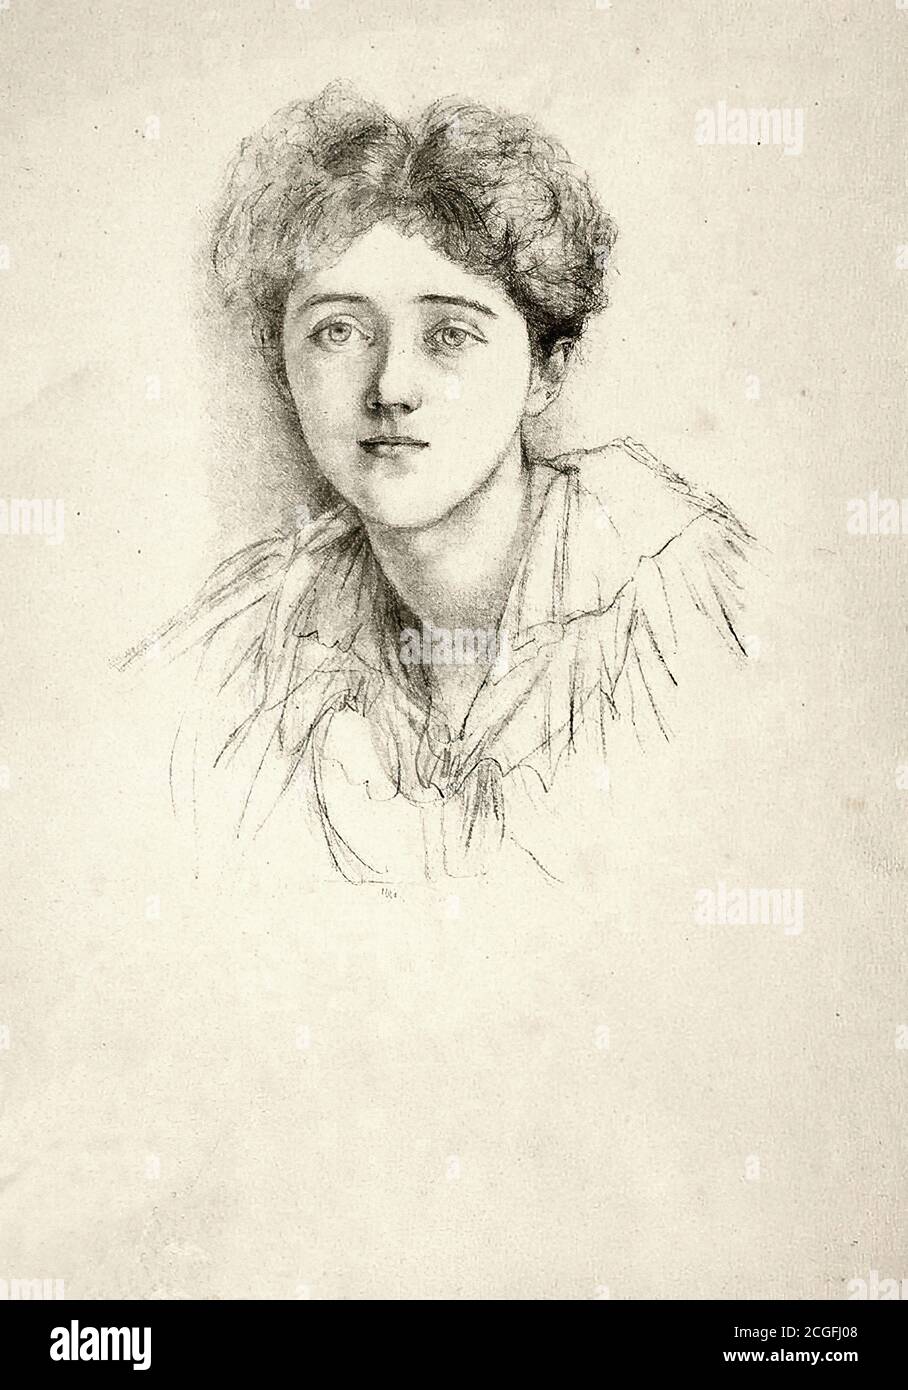 manners, violet - Miss Pamela Plowden, now Pamela Countess of Lytton (daughter-in-law of Edward Bulwen-Lytton, author) - 41868697692 bfd7dd446b o Stock Photo